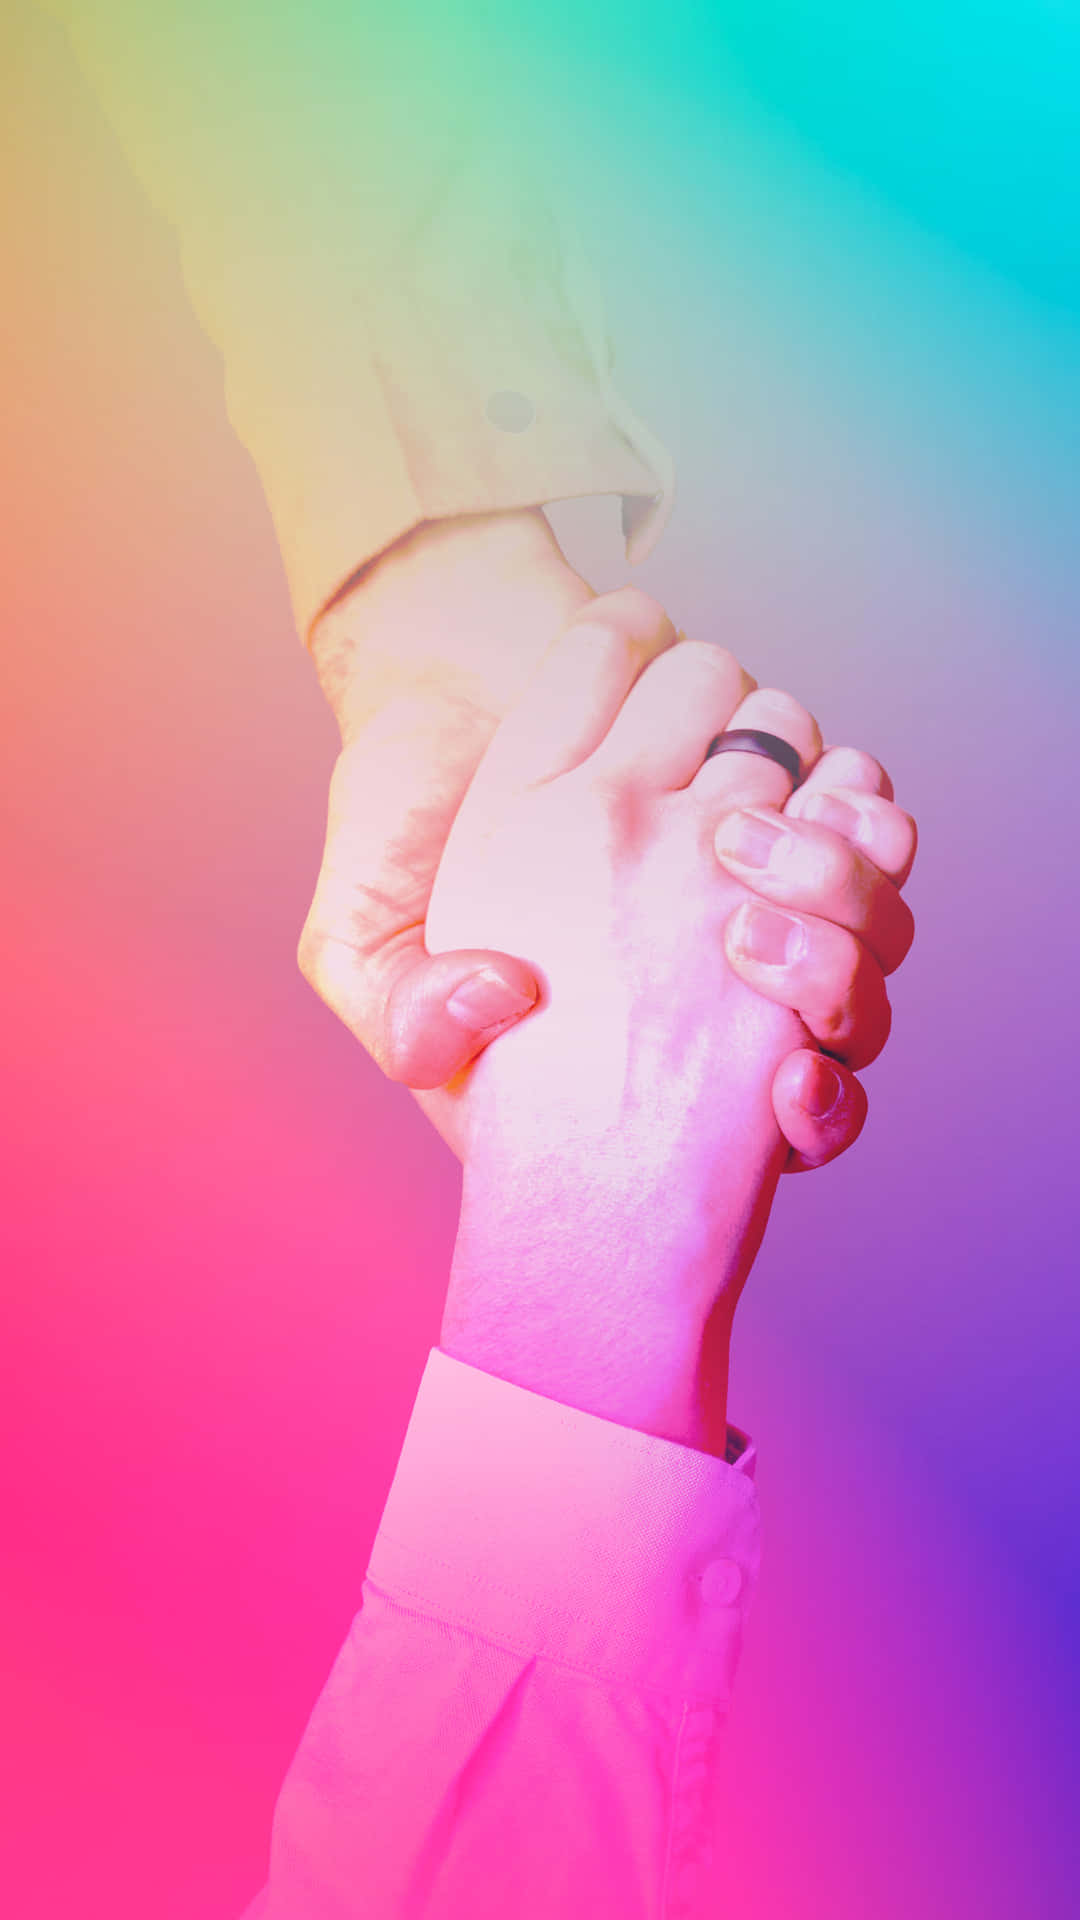 Handshake With Colorful Gradient